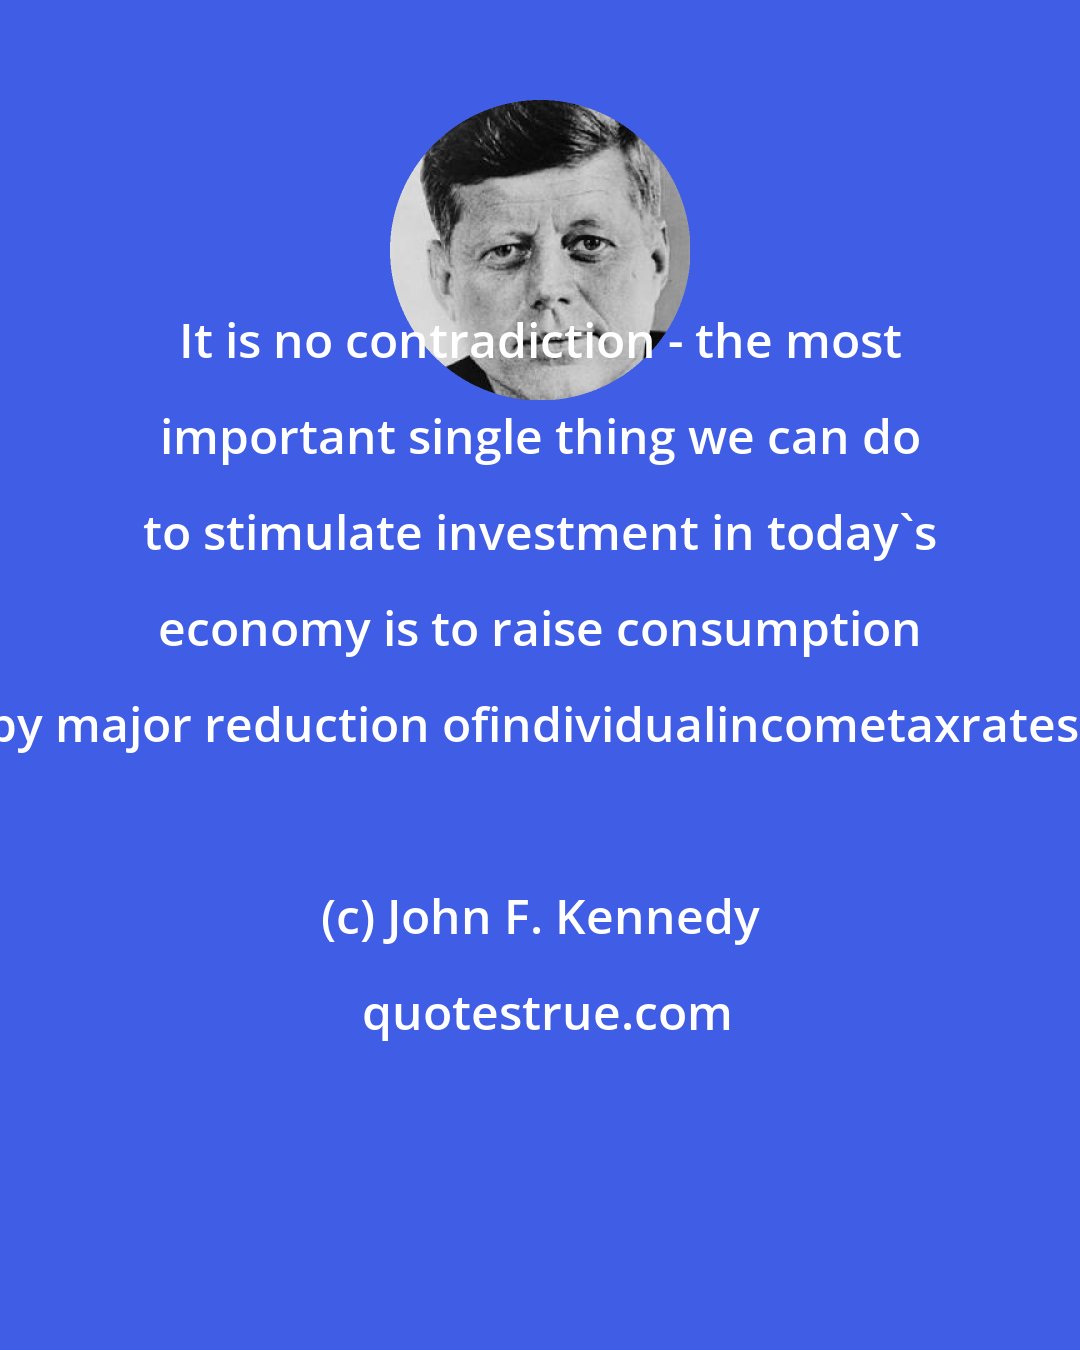 John F. Kennedy: It is no contradiction - the most important single thing we can do to stimulate investment in today's economy is to raise consumption by major reduction ofindividualincometaxrates.